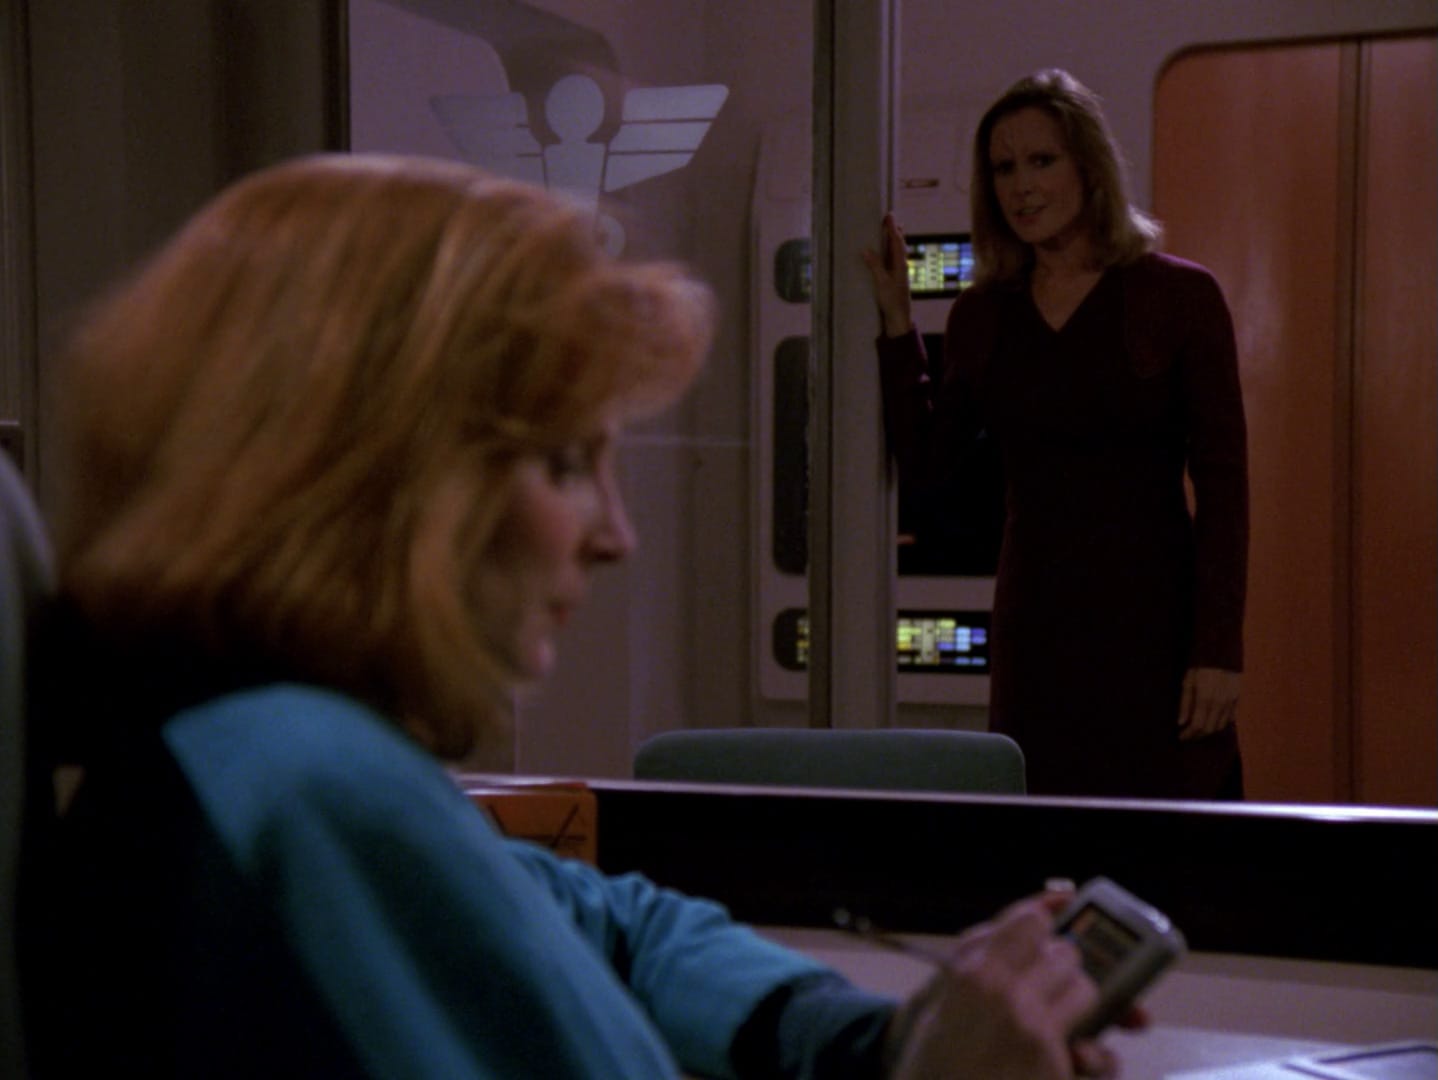 Dr. Crusher sits at her desk writing a report on her Padd. She doesn't look up as Odan's female host speaks from the doorway.